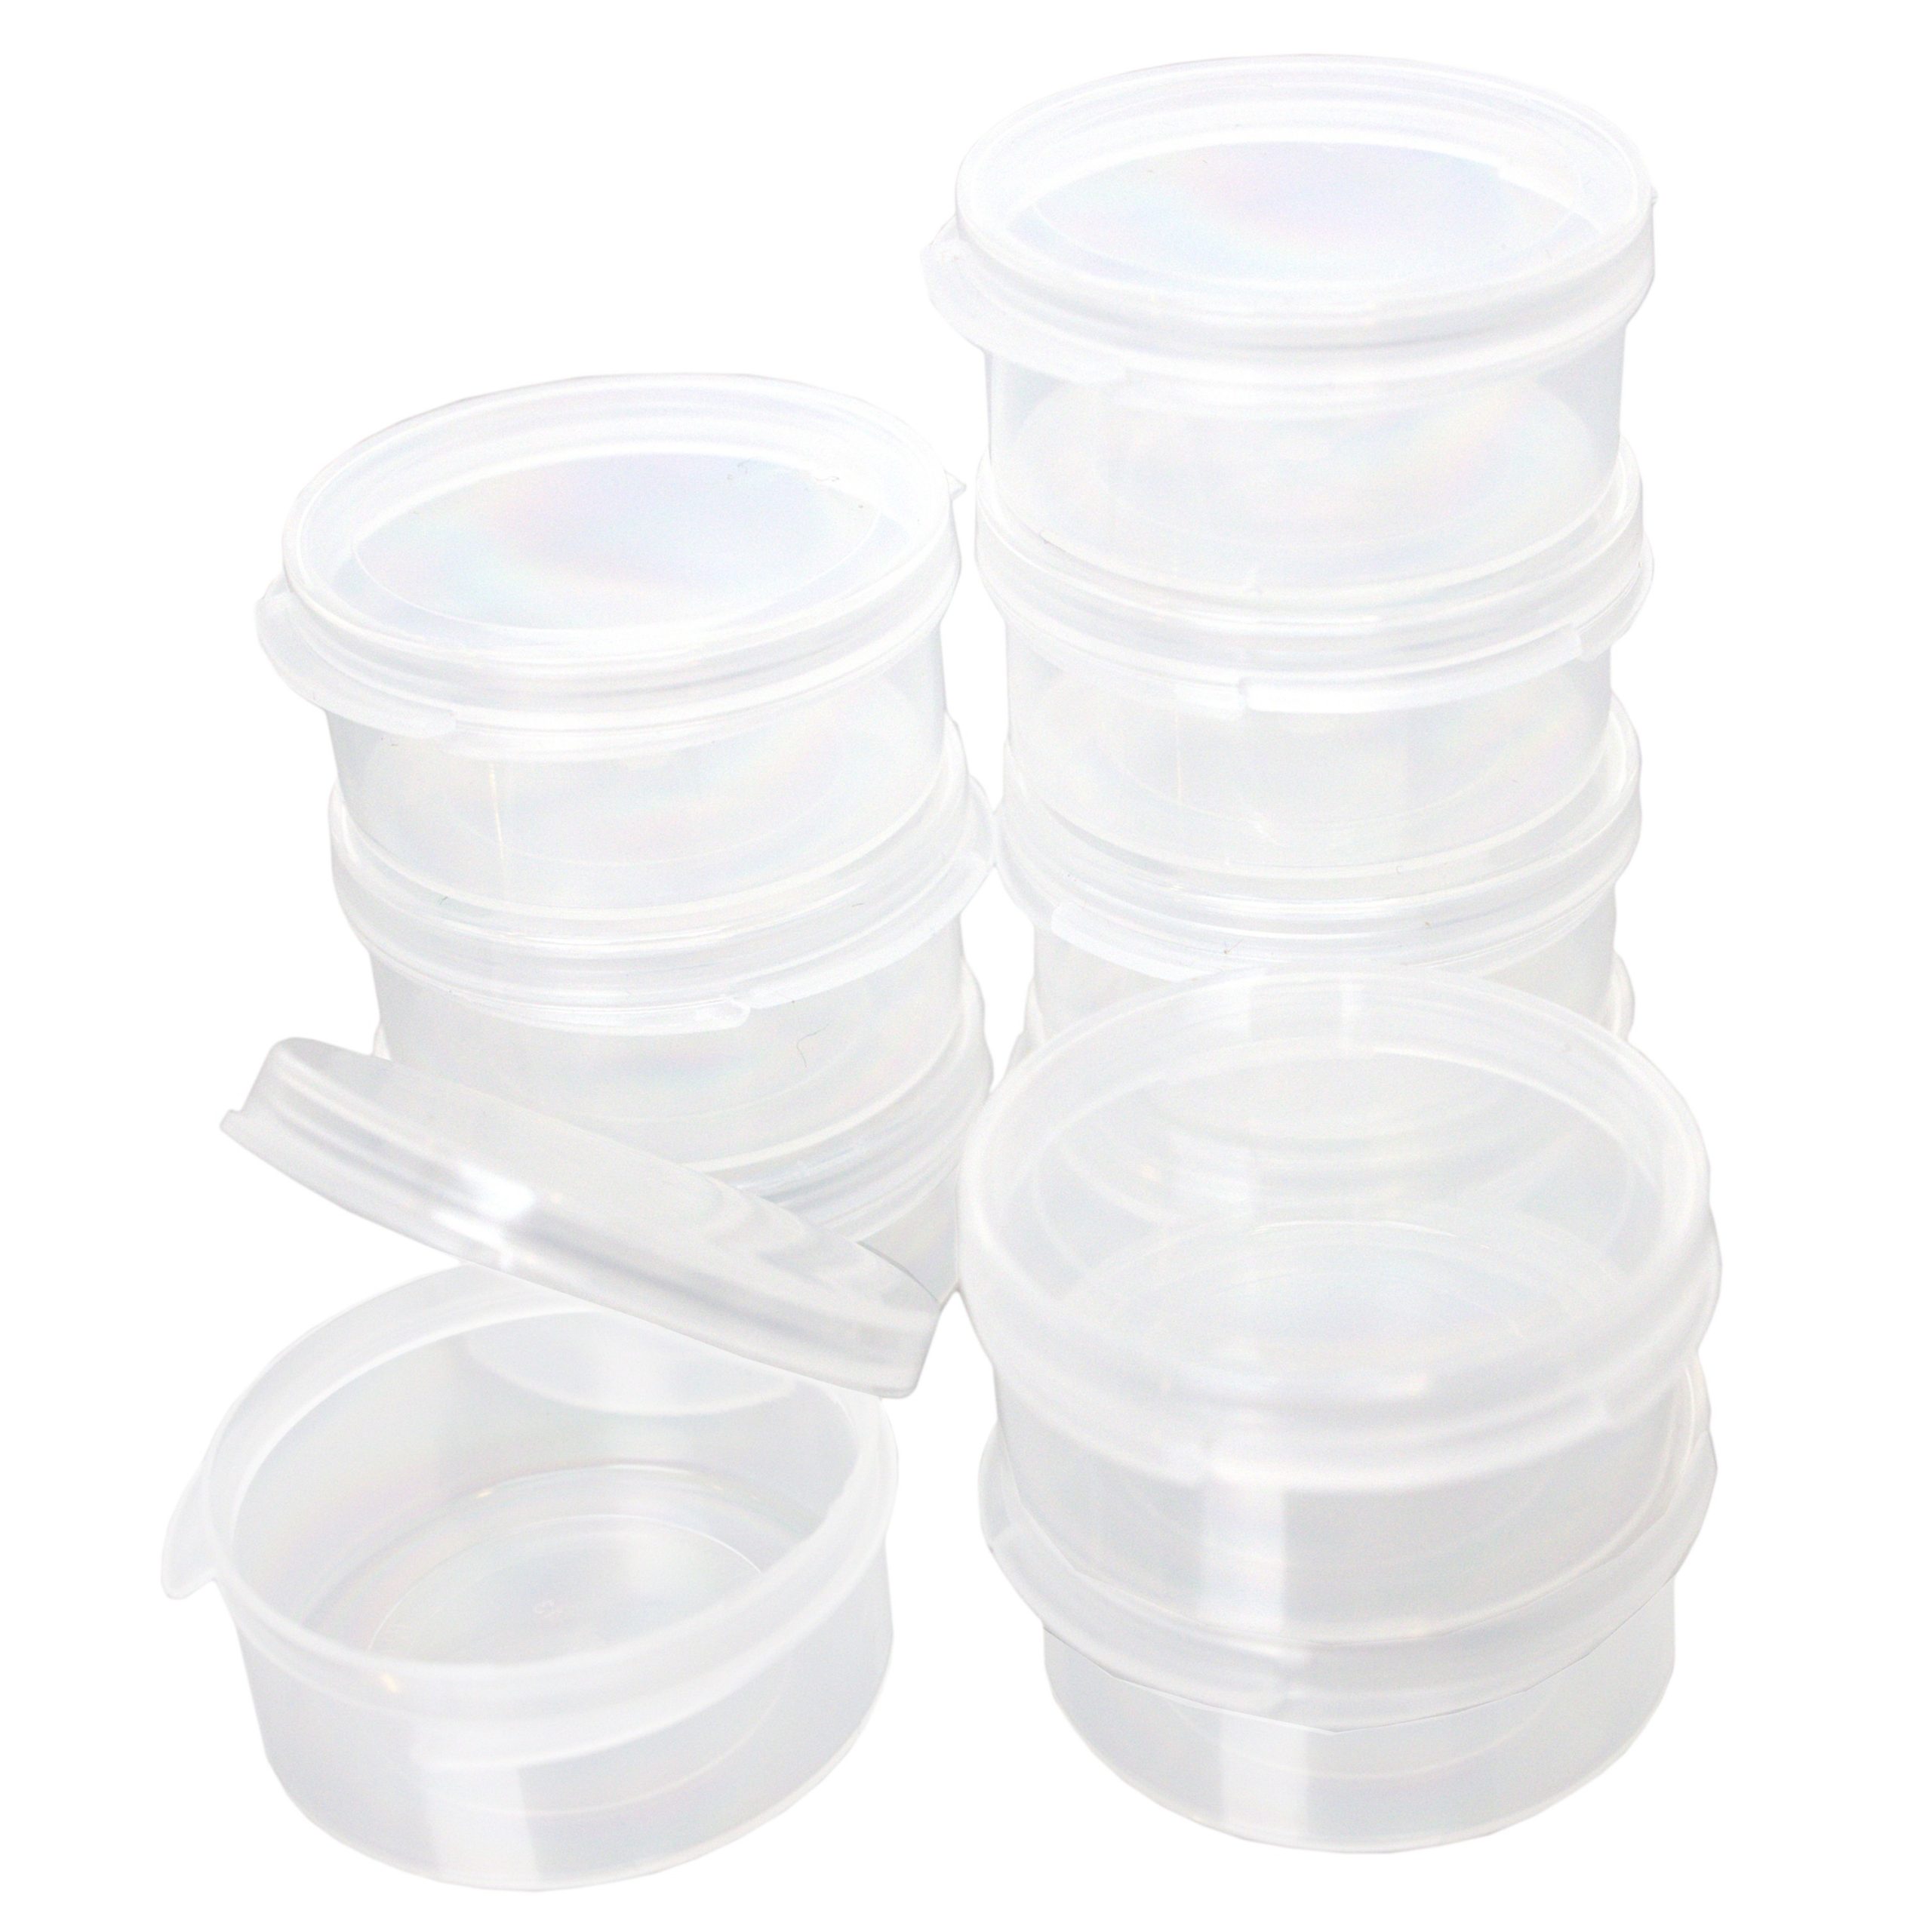 Masterson Solvent Cups